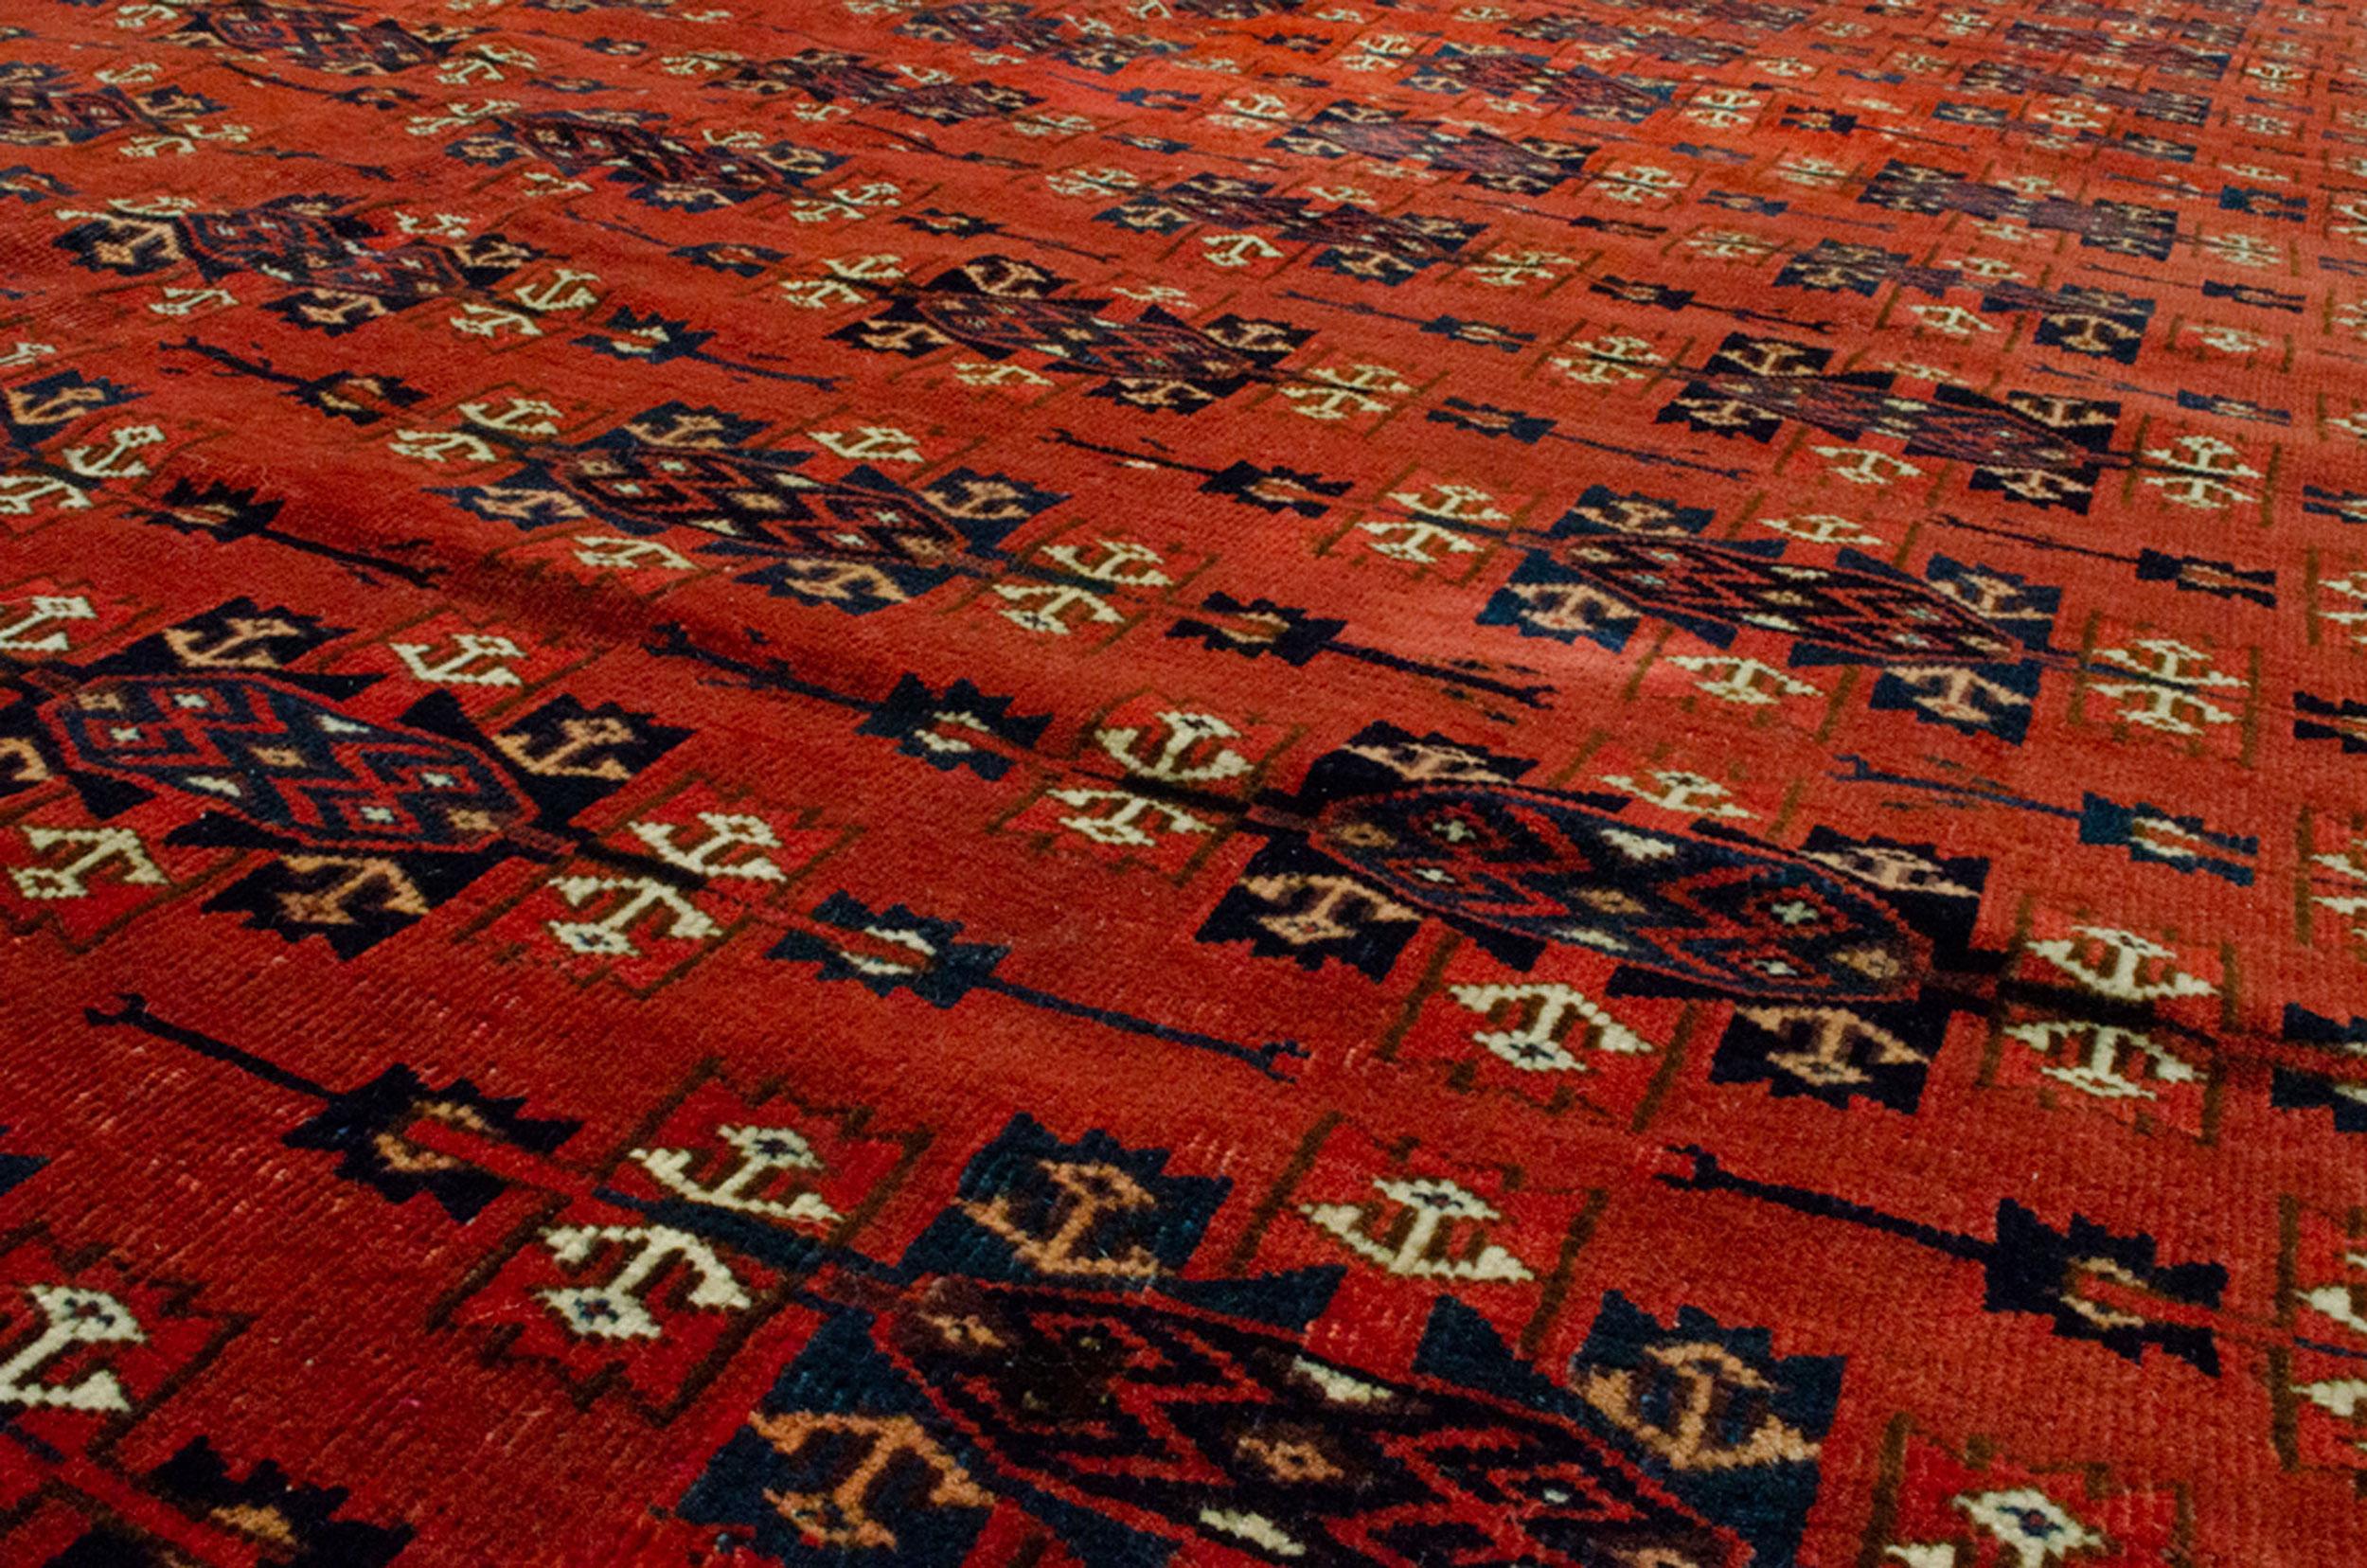 Turkmen carpets have always been a sought after decorating items. They are suitable as a library rug or a dining room rug, as they are all over design. This Yamoud Turkmen with its all over Kepse Gul on a rich red background and a vine and curl leaf